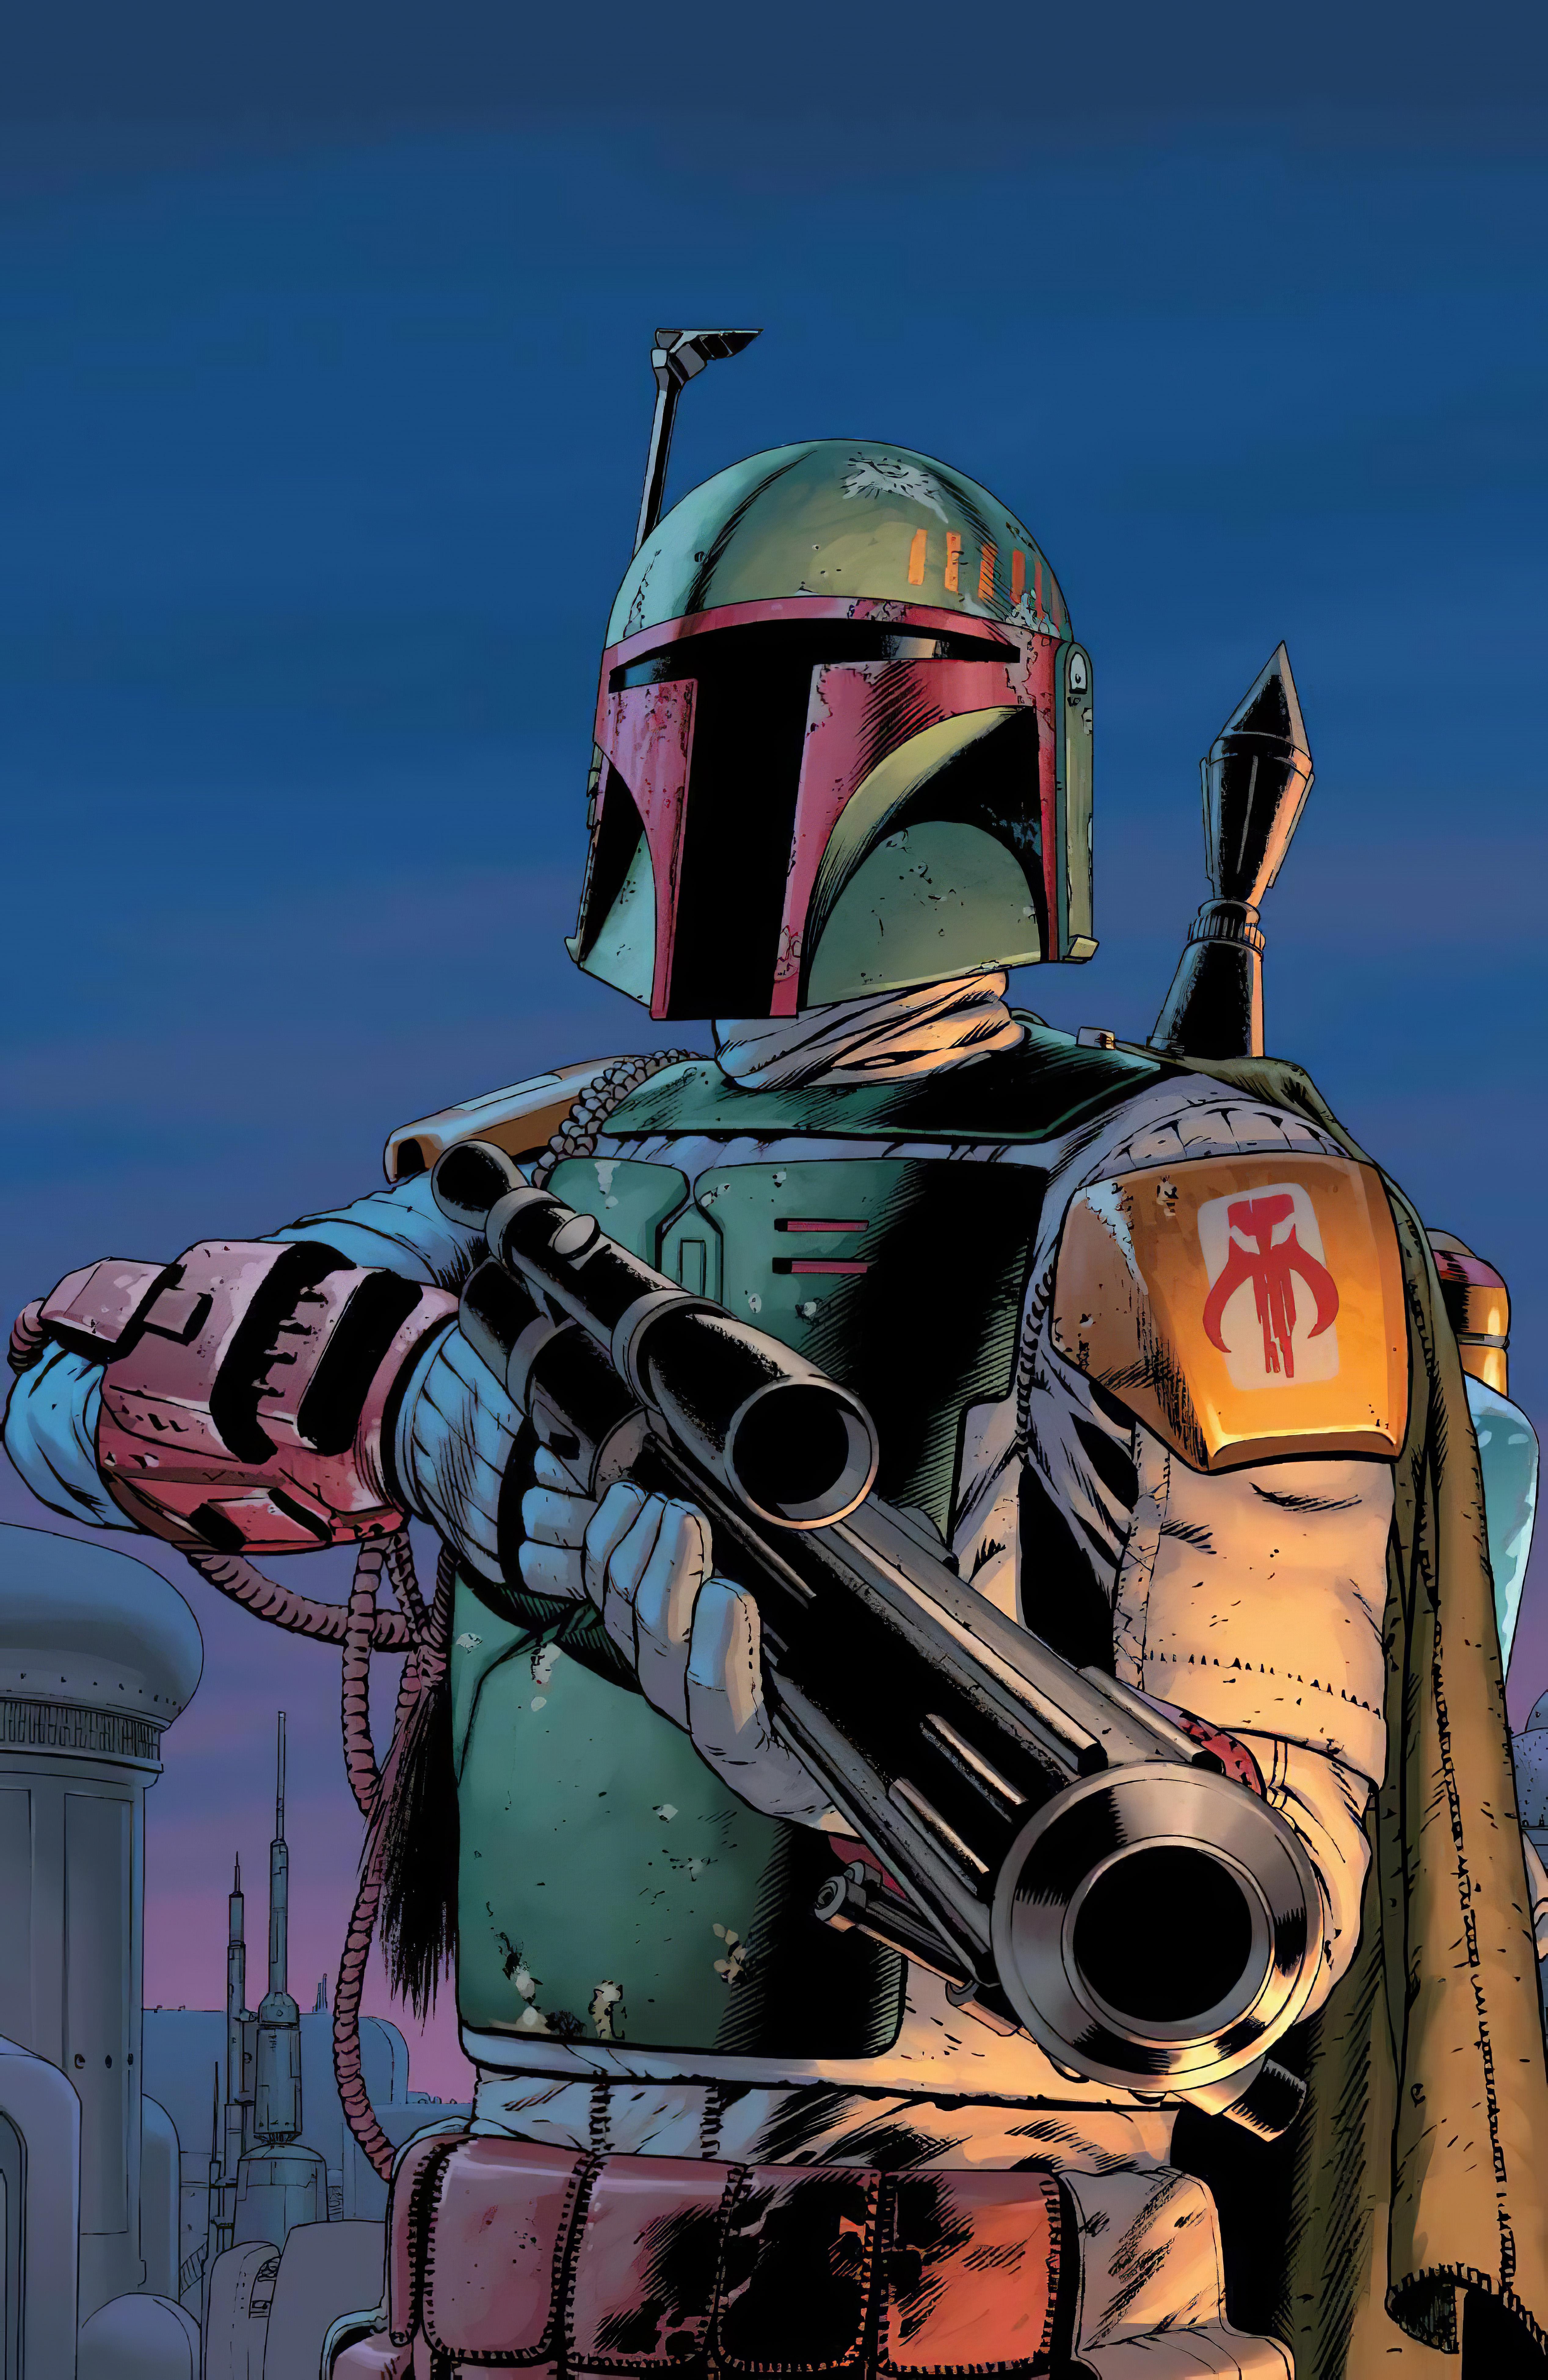 I Upscaled Cleaned This From The Boba Fett's Comic, Could Be A Nice Wallpaper ! - [5070*7795]